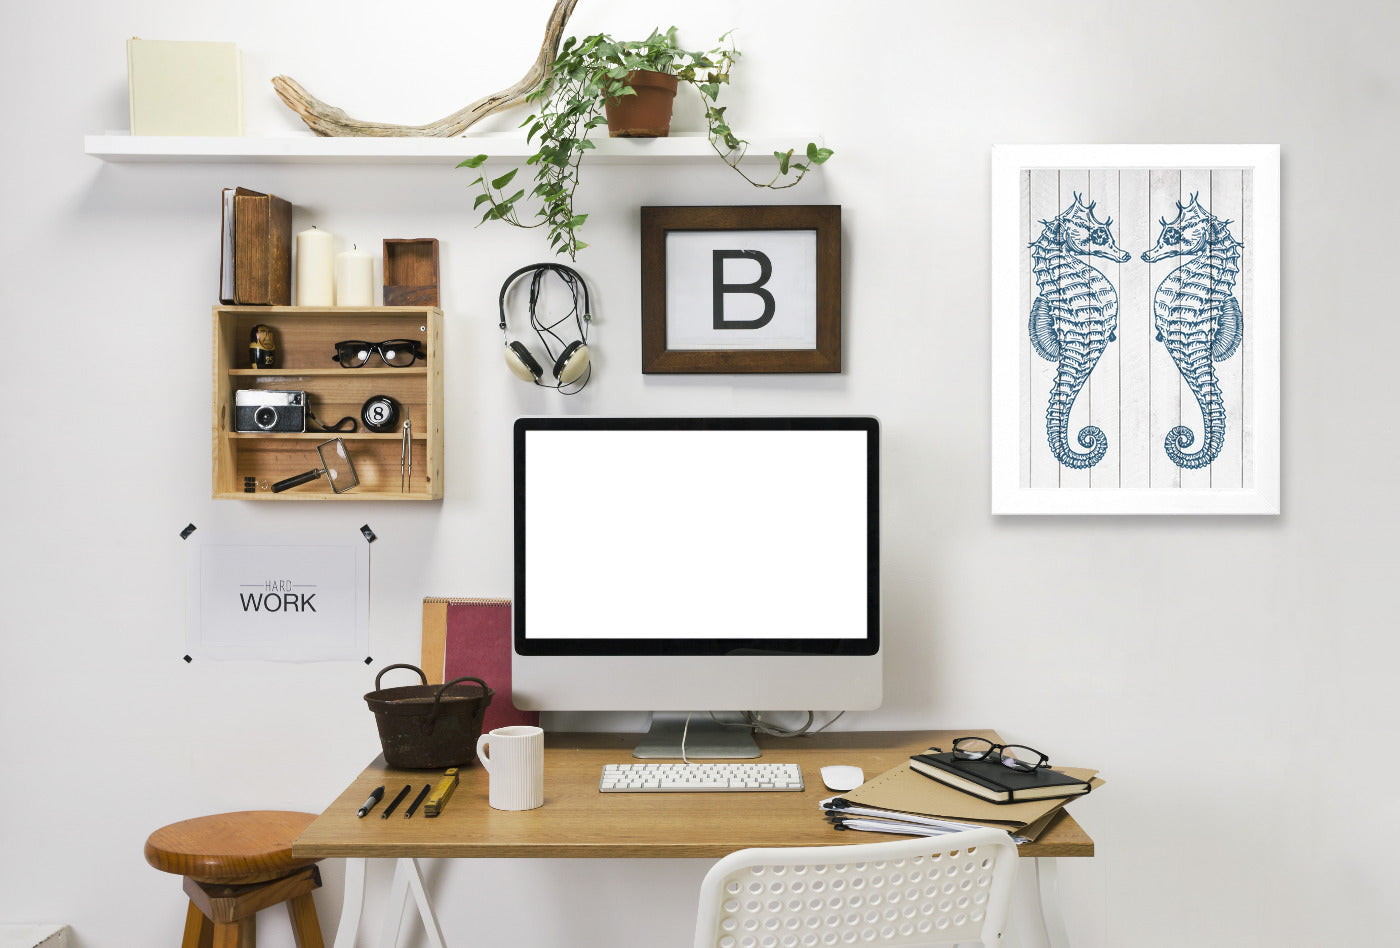 Double Seahorse Wood by Samantha Ranlet Framed Print - Americanflat